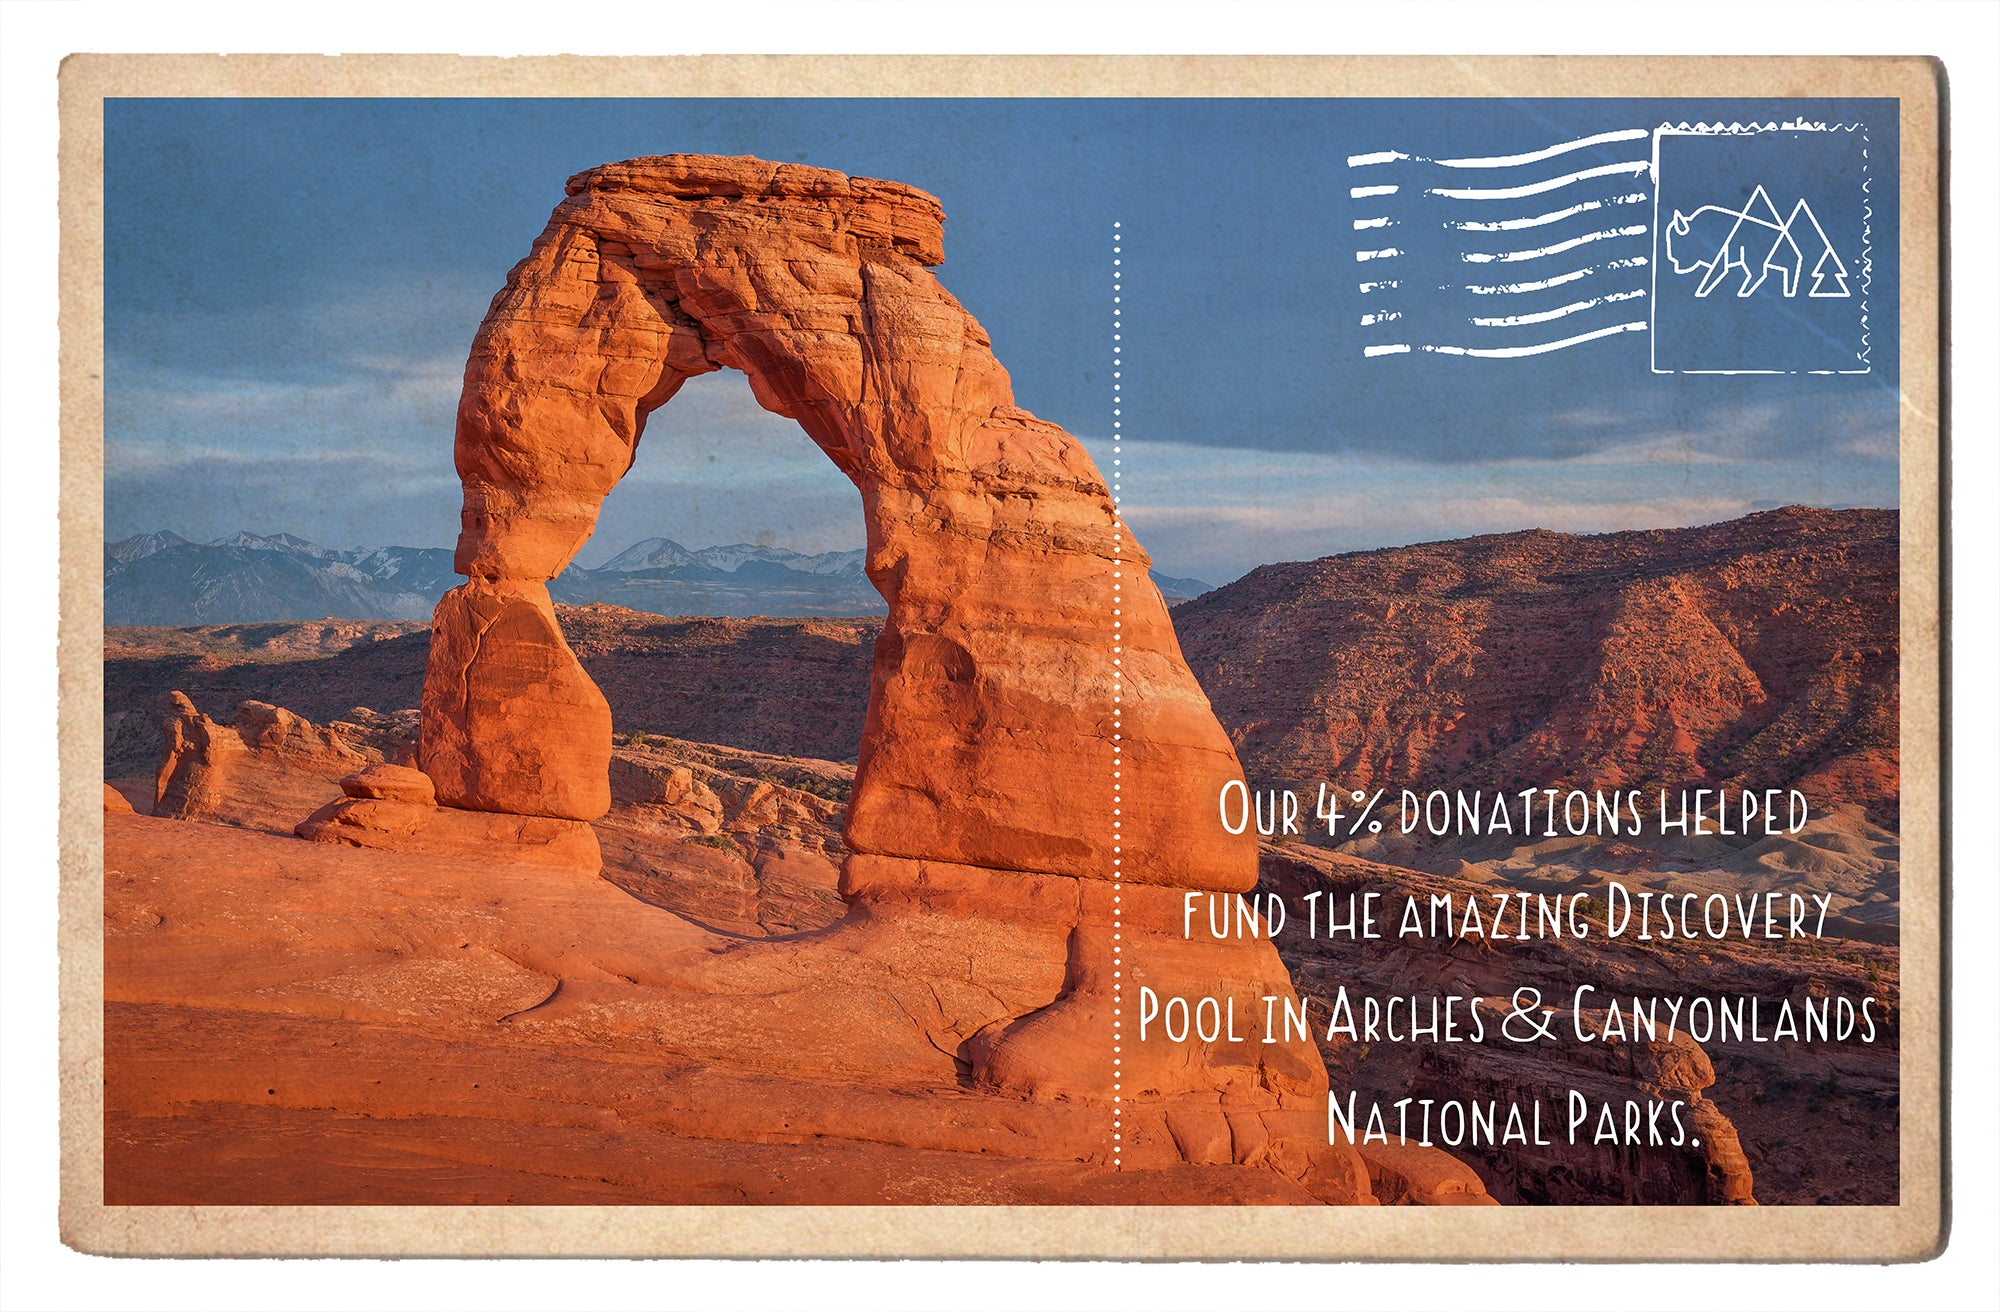 Funding the Amazing Discovery Pool in Arches and Canyonlands